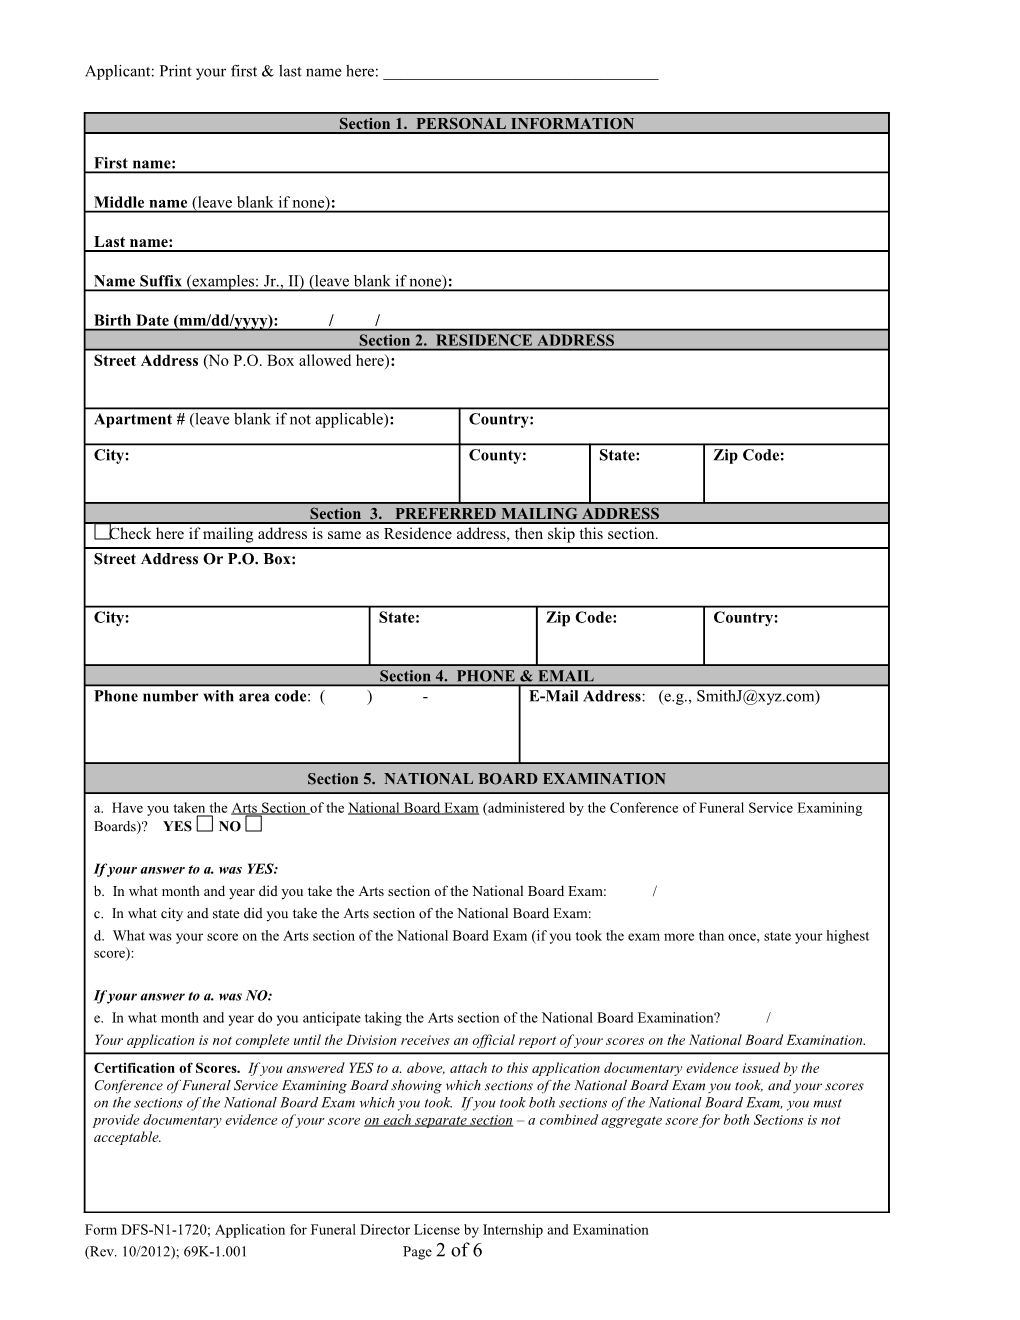 Application for Funeral Director License by Endorsement